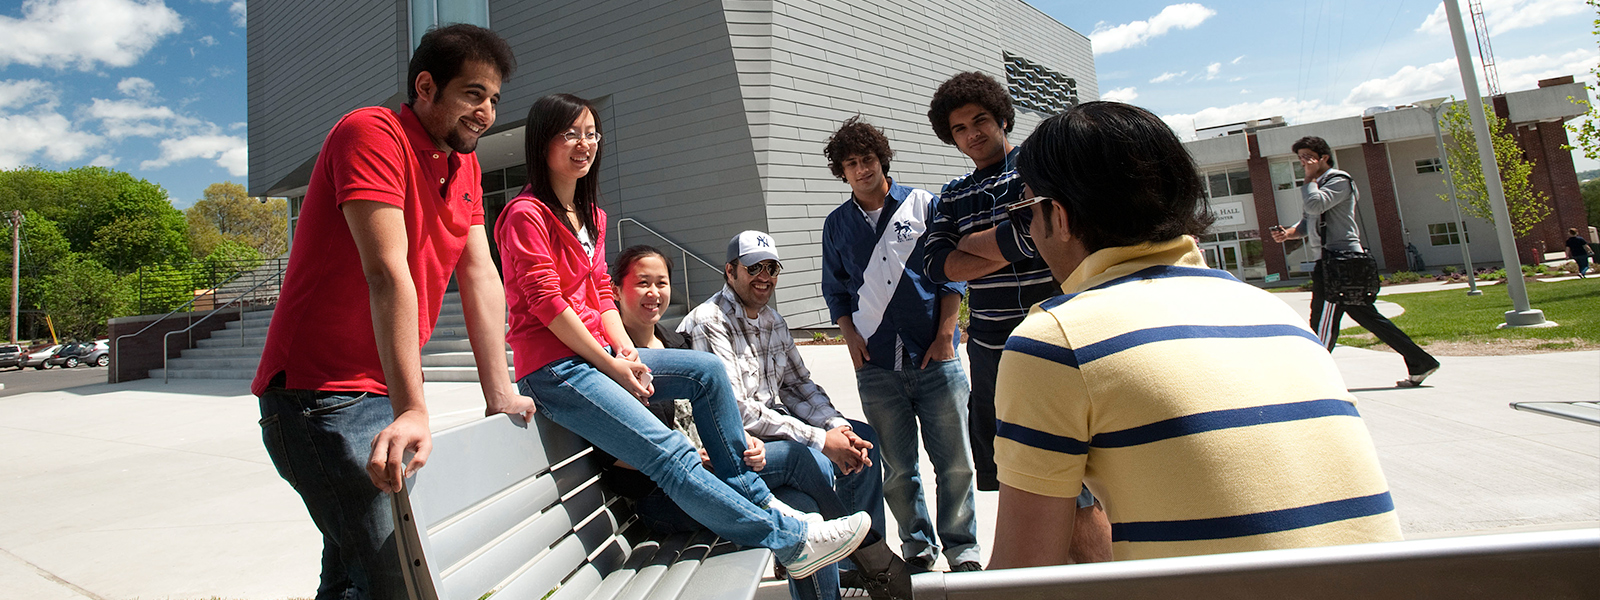 Image of international students on the University of New Haven campus.